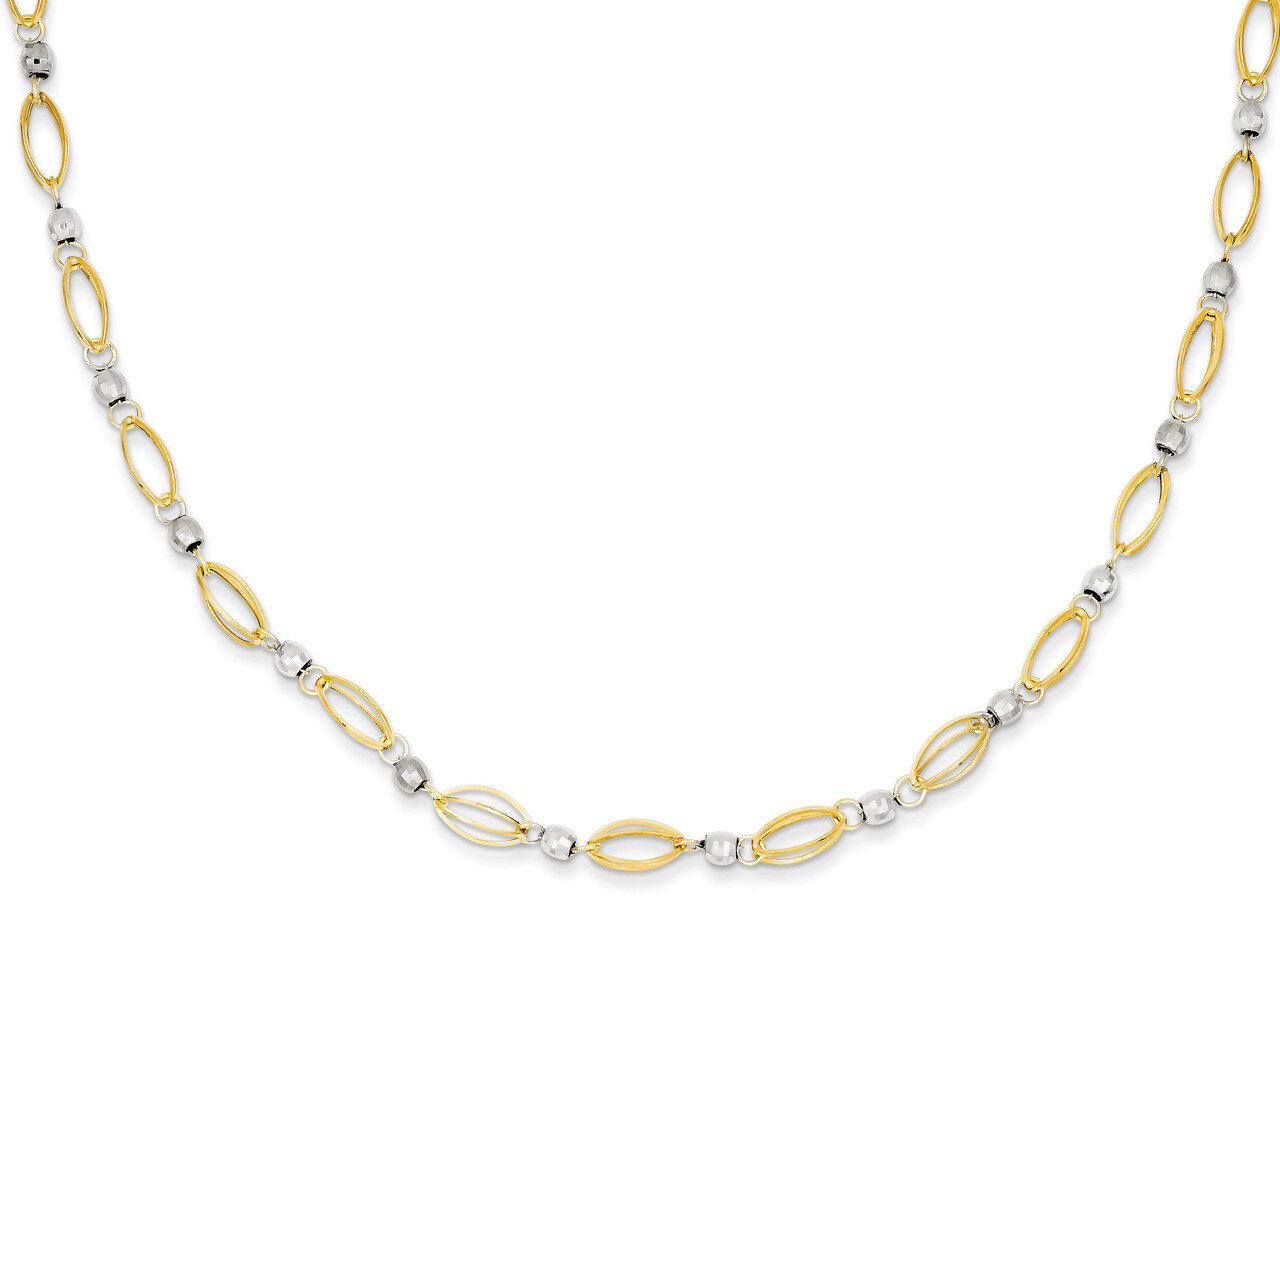 Fancy Mirror Bead Necklace 18 Inch 14k Two-Tone Gold SF1853-18